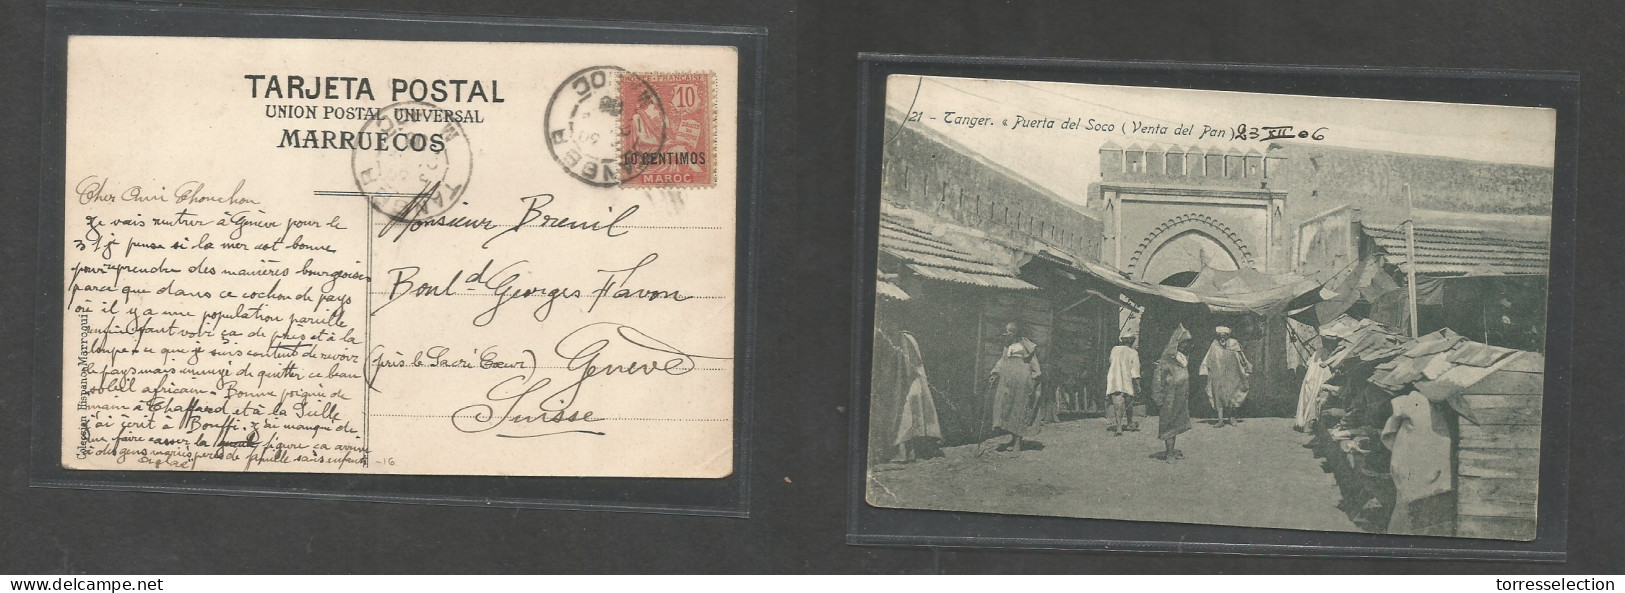 MARRUECOS - French. 1906. Tanger - Switzerland, Geneva. Fkd Ppc. Spanish Currency 10c Ovptd Red, Tied Cds. Fine. SALE. - Morocco (1956-...)